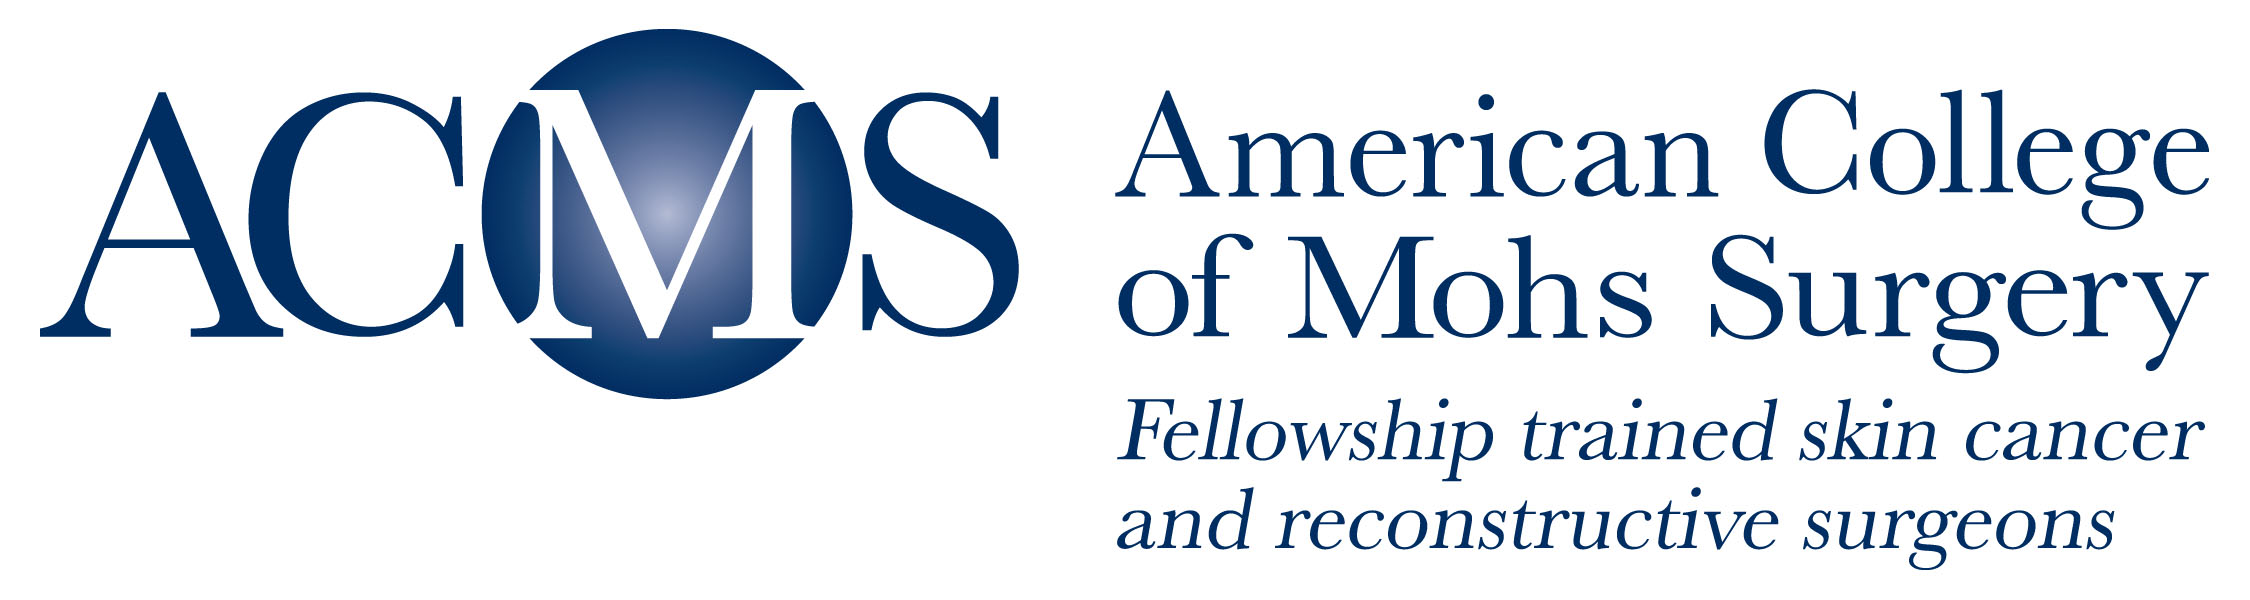 Dr. Molenda is a fellow of the American College of Mohs Surgery